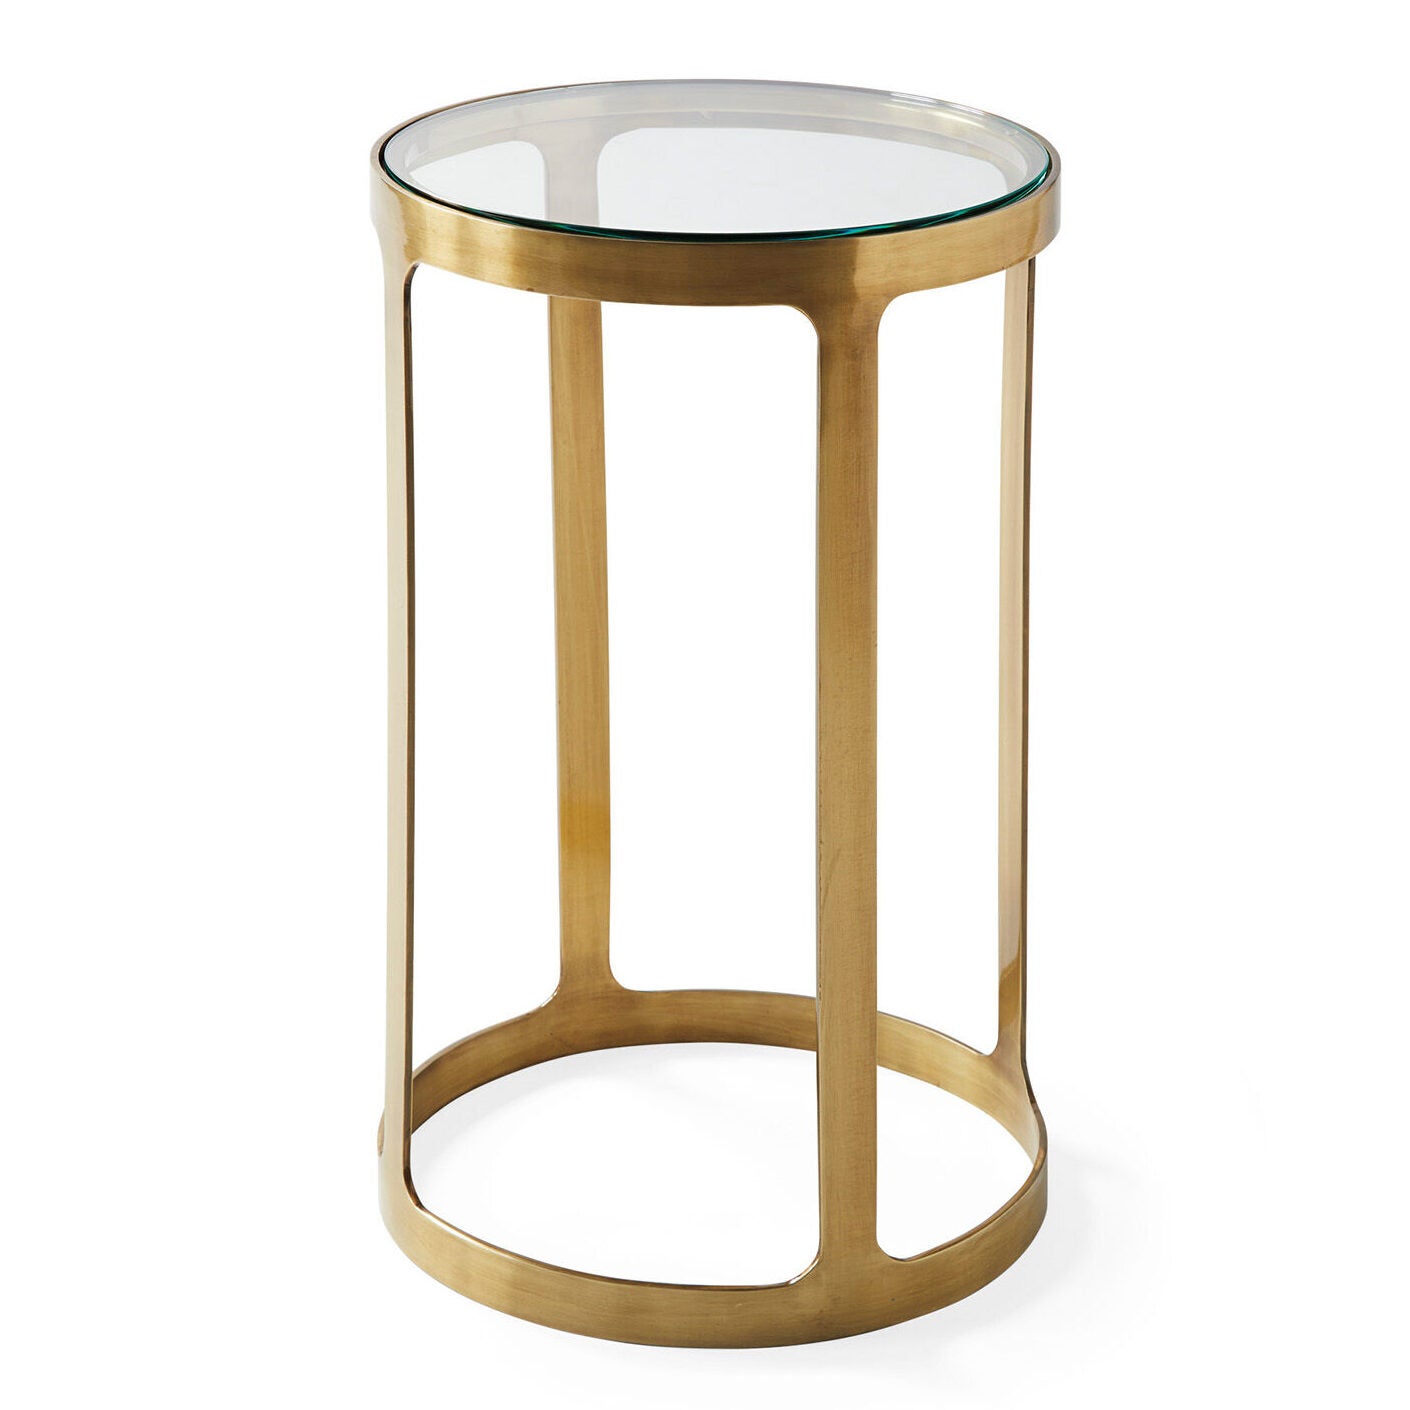 18 Tables That Hold Just a Martini—And Nothing Else